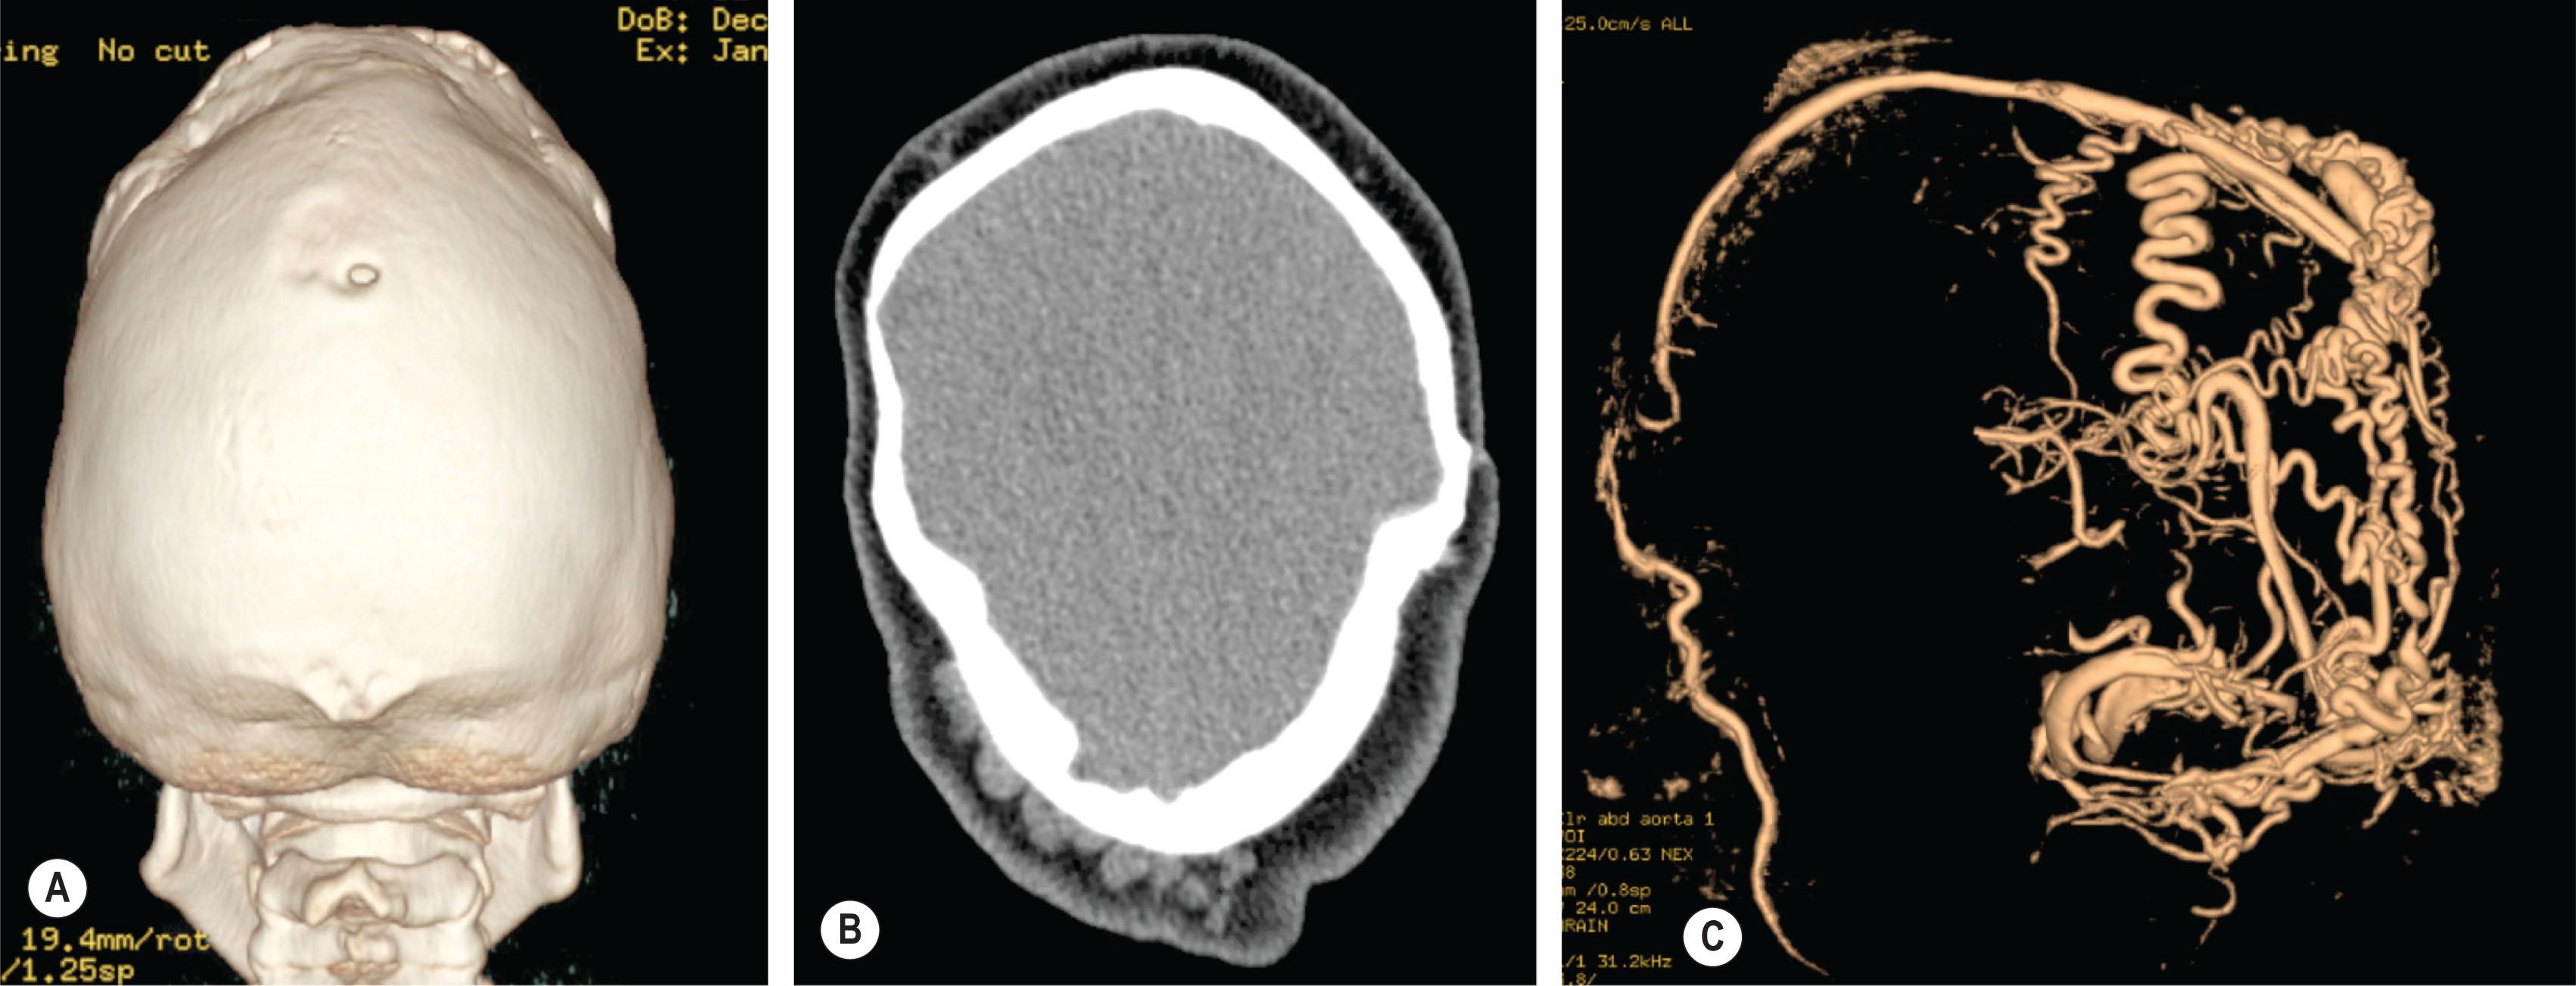 Figure 25.1.14, 3D CT scan showing an innocuous foramen in the midline of a 14-year-old boy with Crouzon syndrome (A) . Axial views demonstrating large dilated subcutaneous veins (B) . MR venogram shows an extensive subcutaneous network of veins emanating from a large emissary vein connected to the sagittal sinus (C) . Disruption of these venous channels during surgery could be associated with acute intracranial hypertension and mortality.